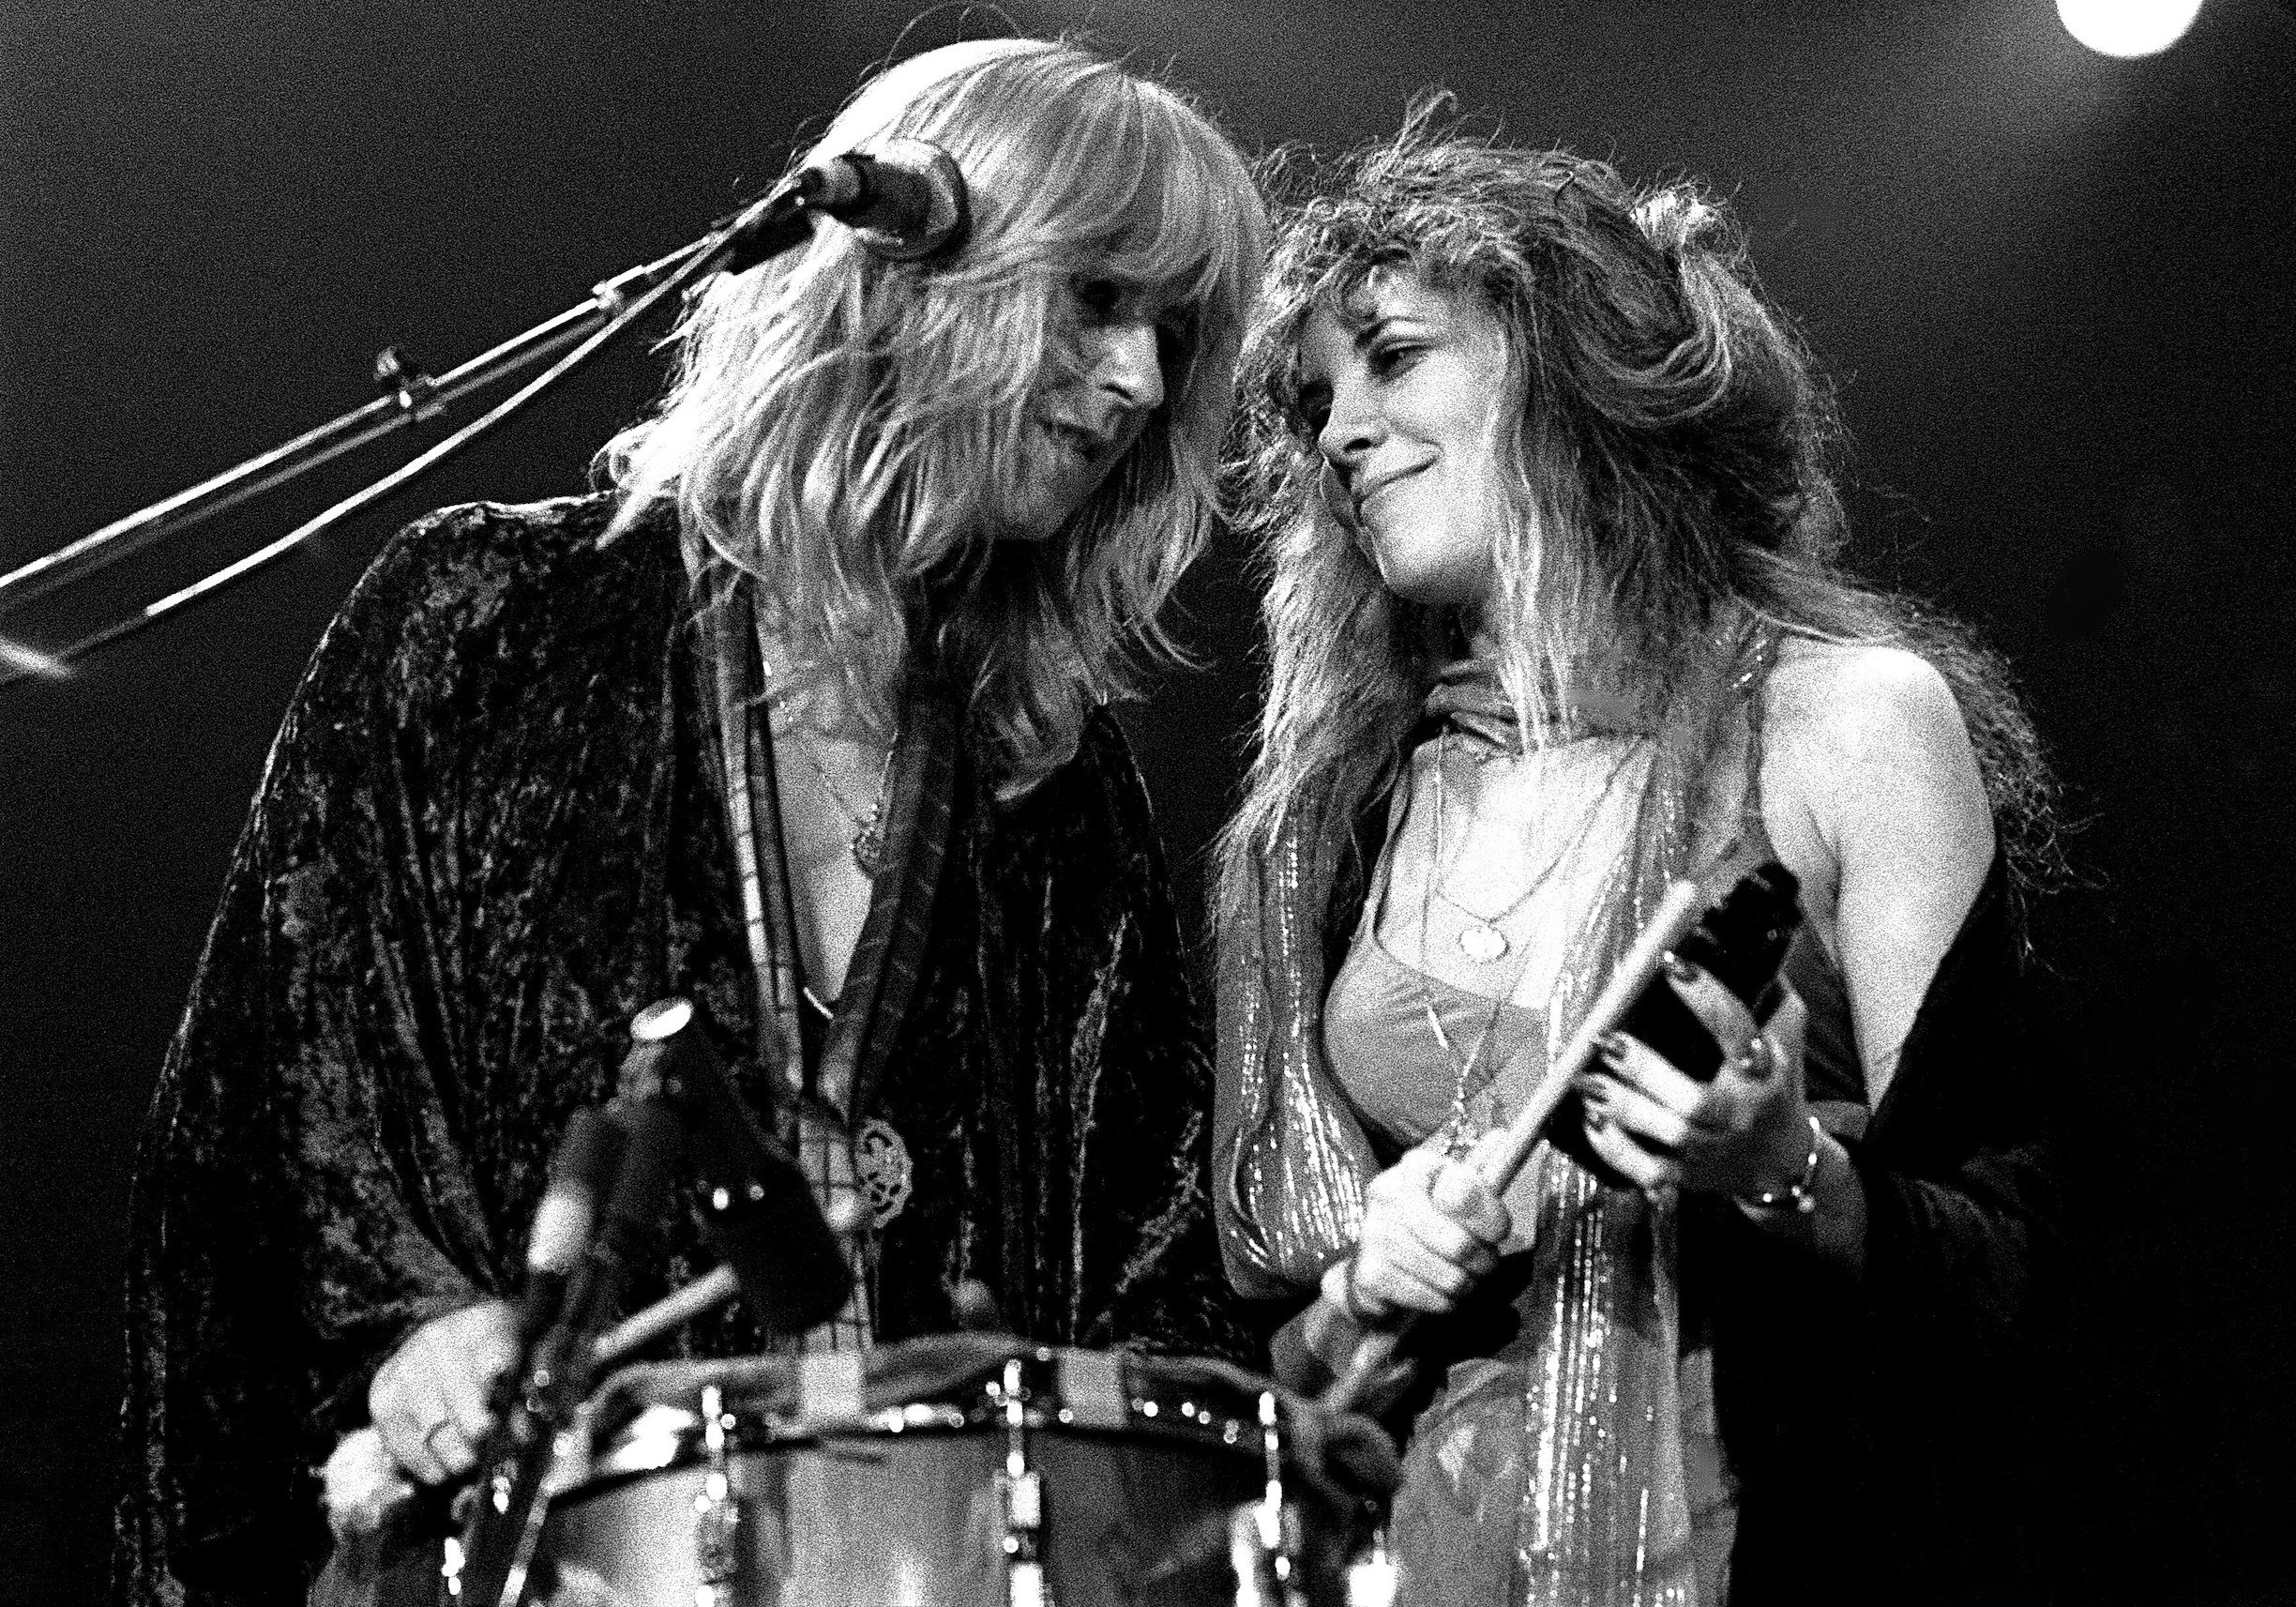 Fleetwood Mac, Rock and Roll Hall of Fame (Class of 1998) Christine McVie and Stevie Nicks